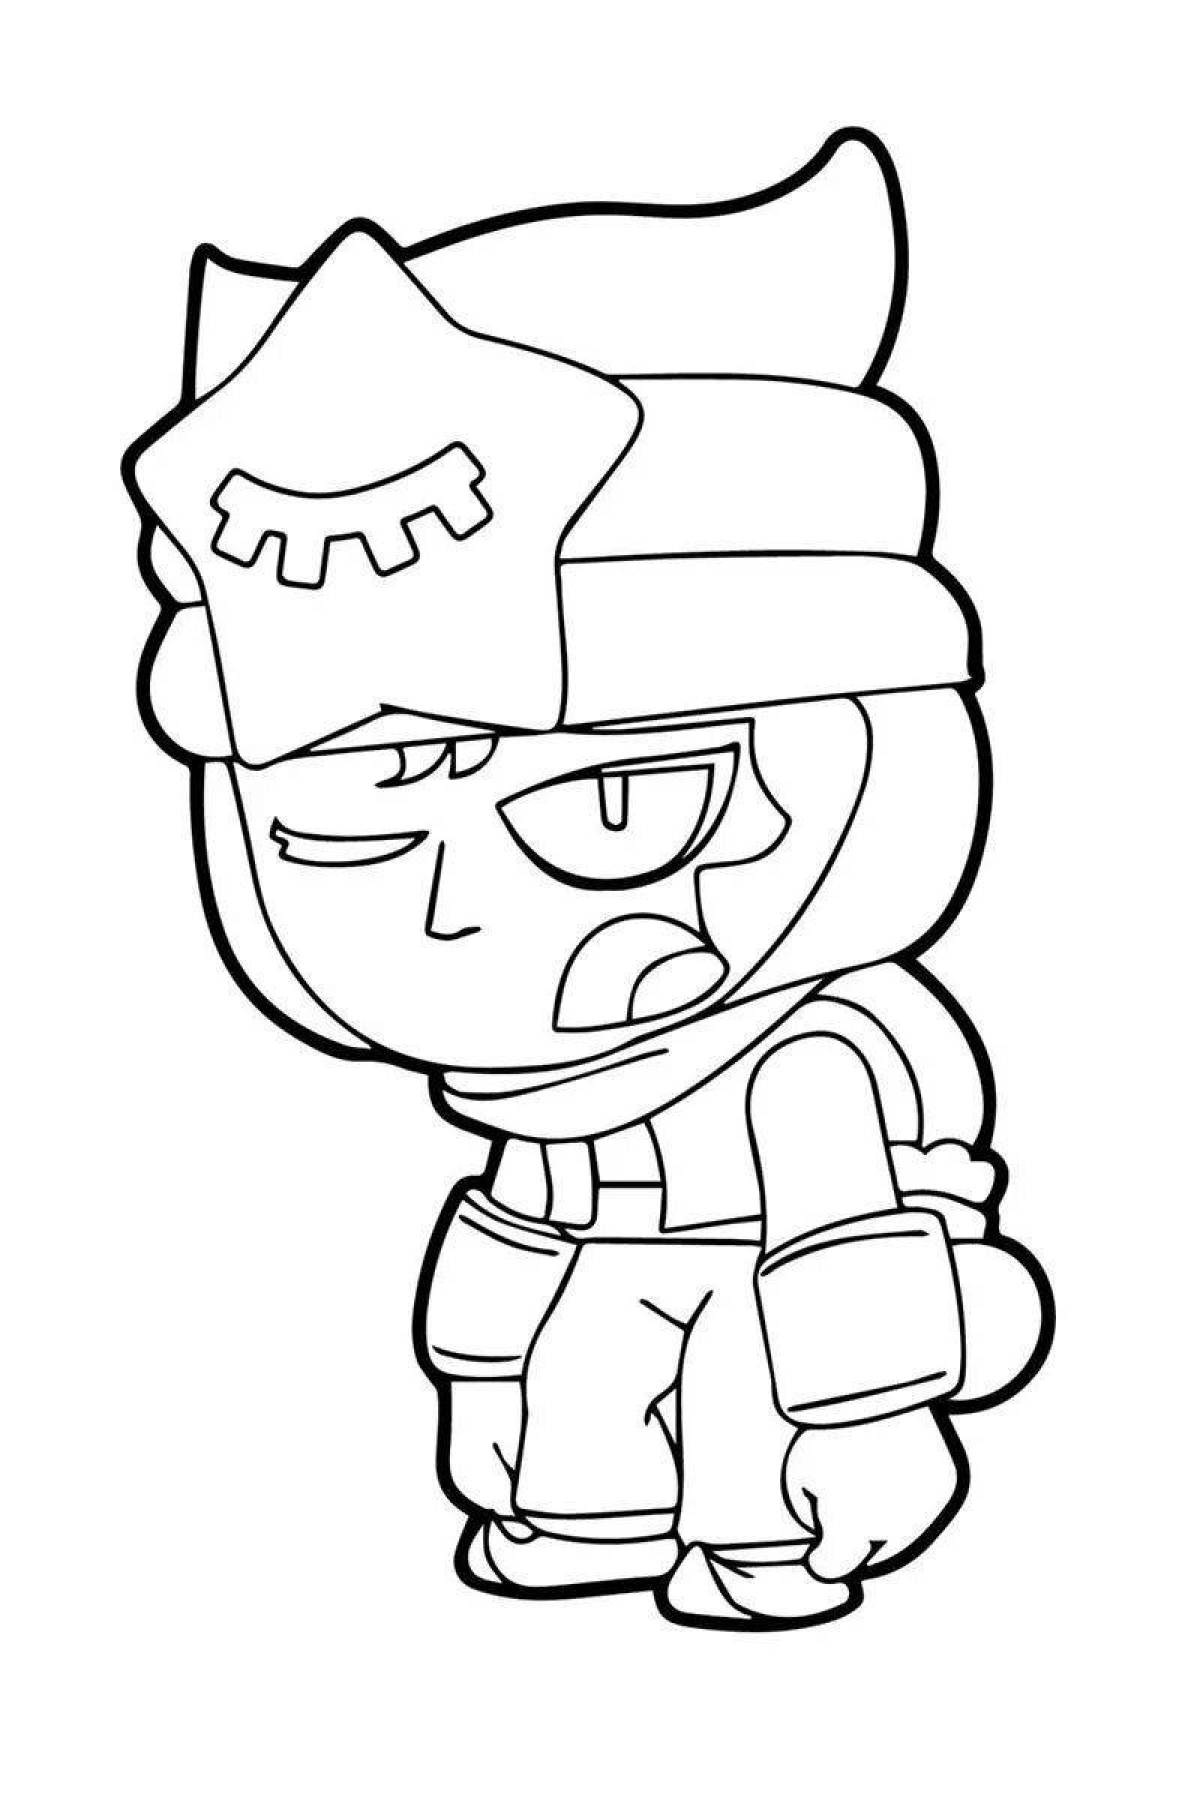 Animated brawl stars coloring pages for boys